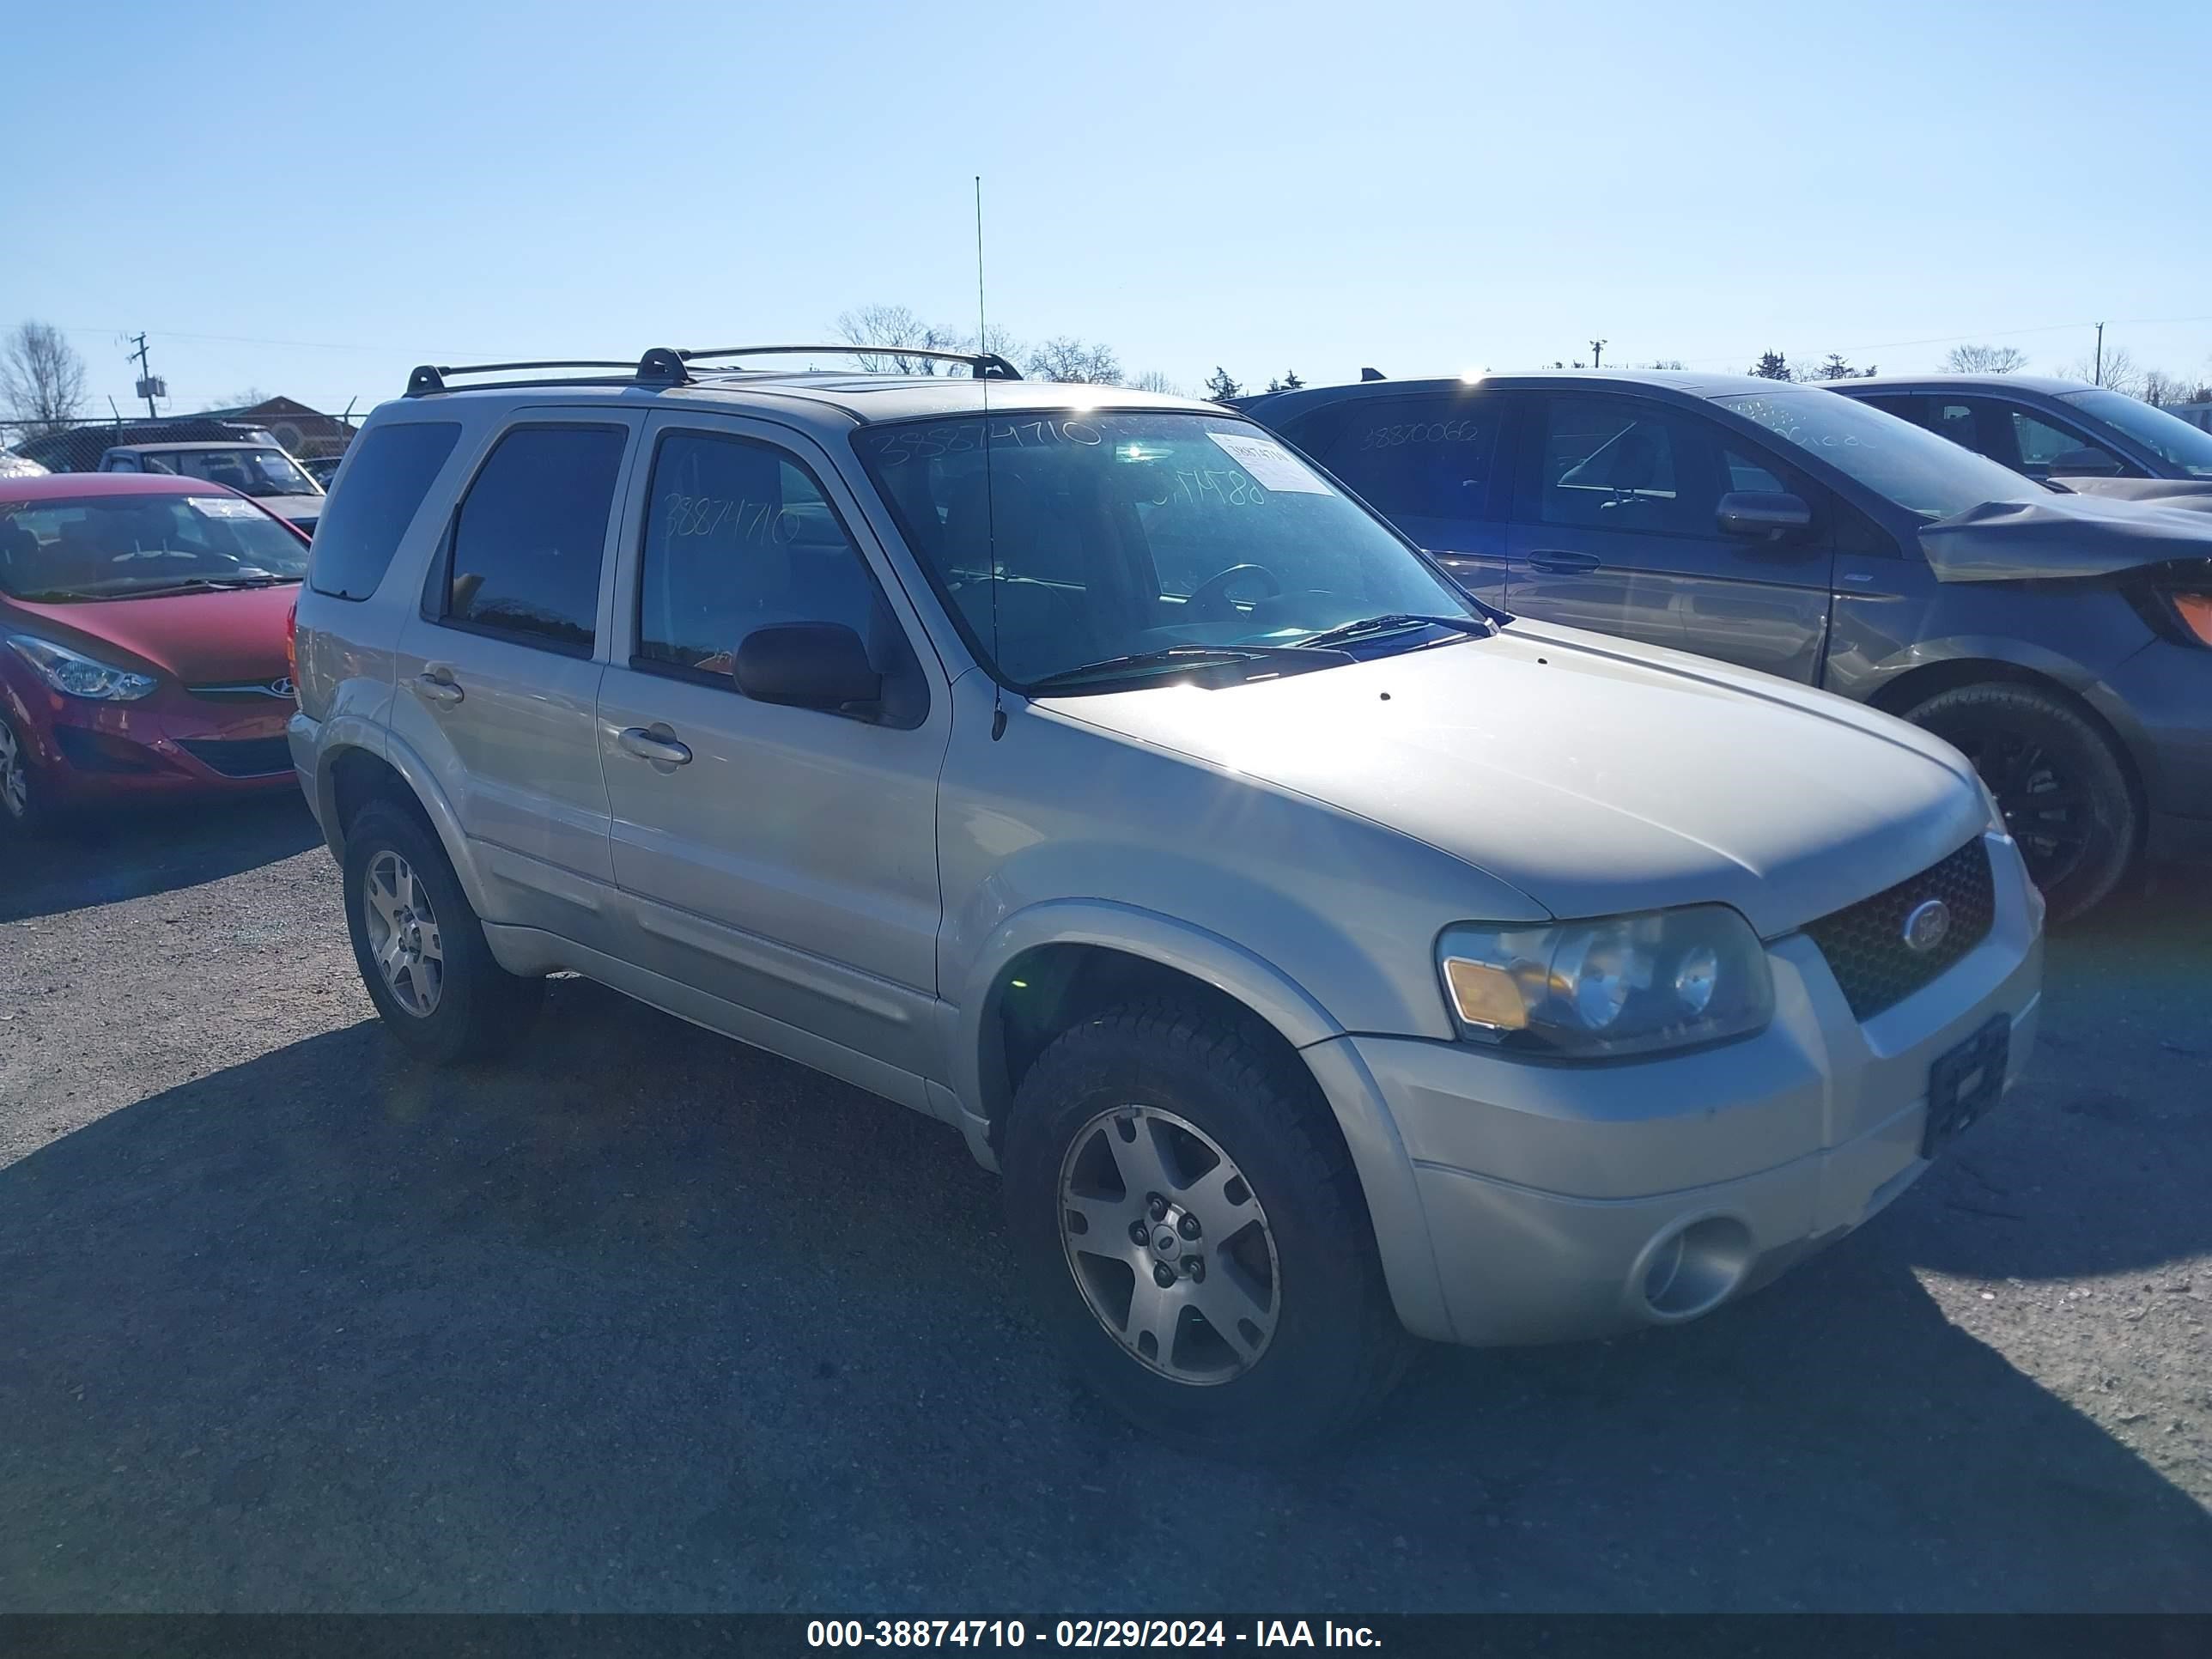 vin: 1FMYU04105KB16994 1FMYU04105KB16994 2005 ford escape 3000 for Sale in 22701, 15201 Review Rd, Culpeper, USA